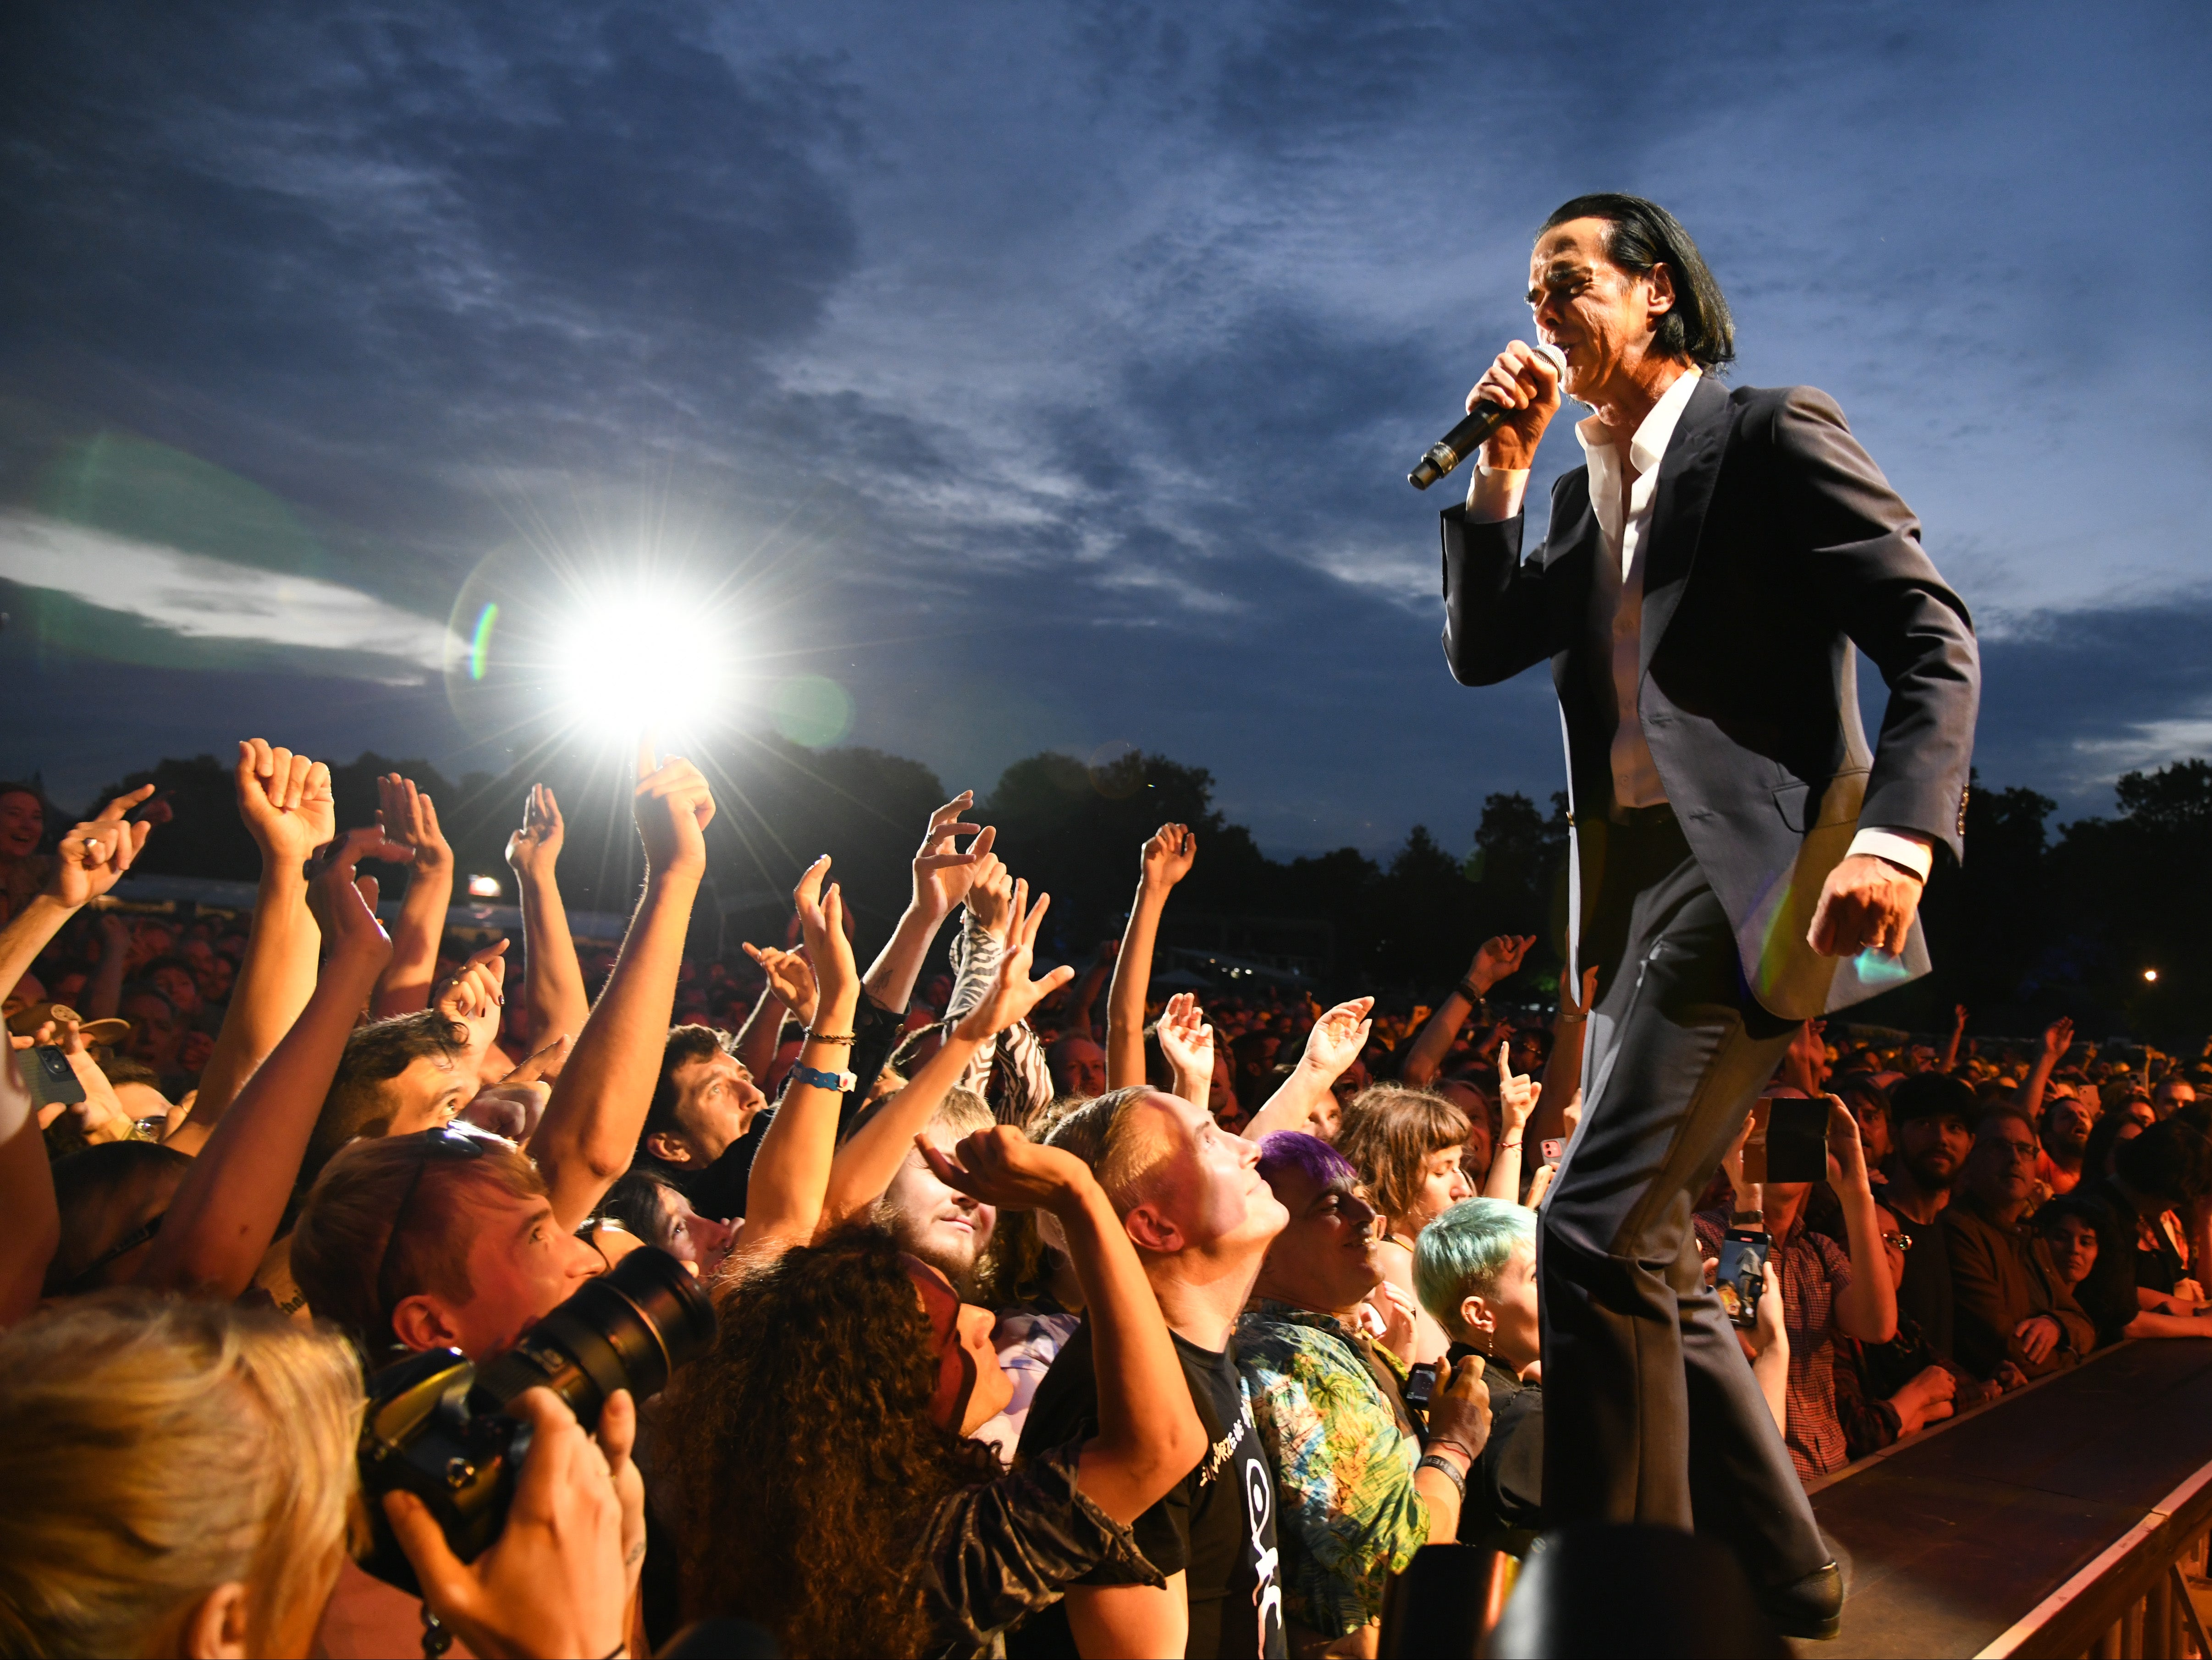 Nick Cave performing at All Points East festival in London